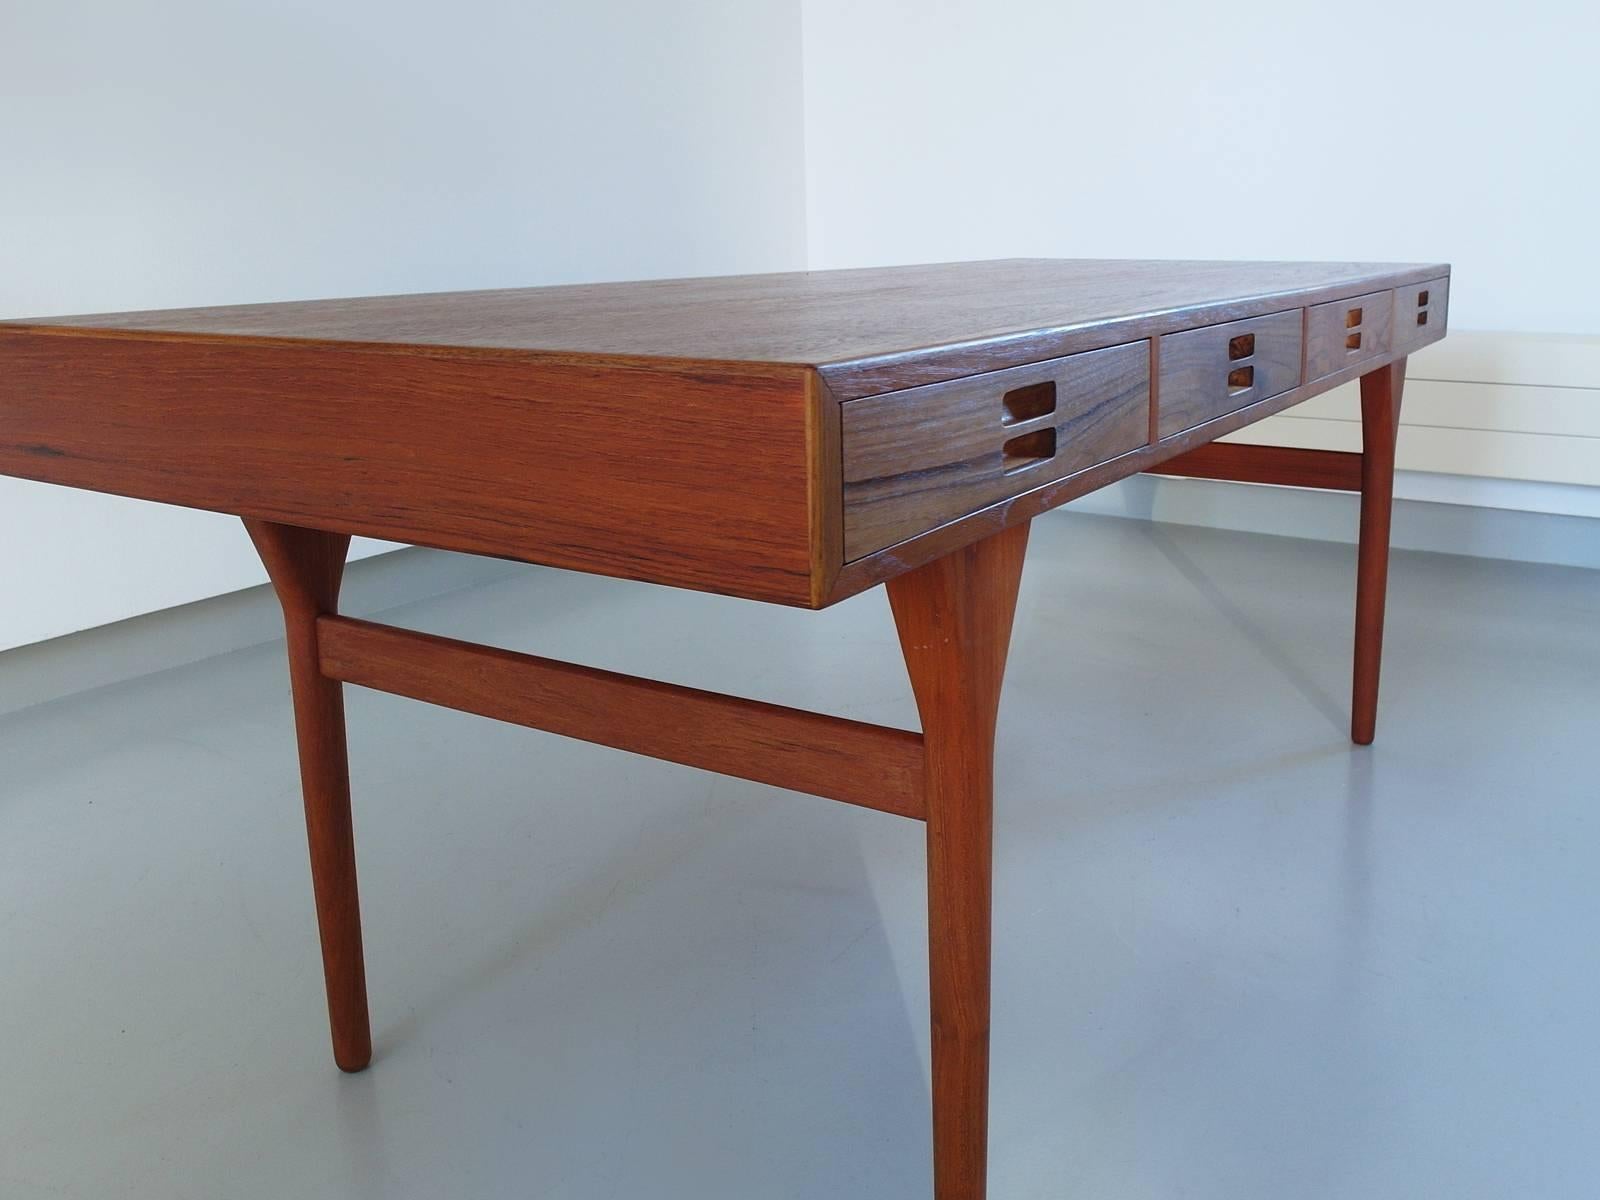 Beautiful freestanding writing desk designed by Nanna Ditzel for Søren Willadsen, Denmark, 1958. Perhaps the most beautiful Mid-Century desk ever designed. 
This exclusive teak desk is in pristine, fully restored condition and has a refined wood